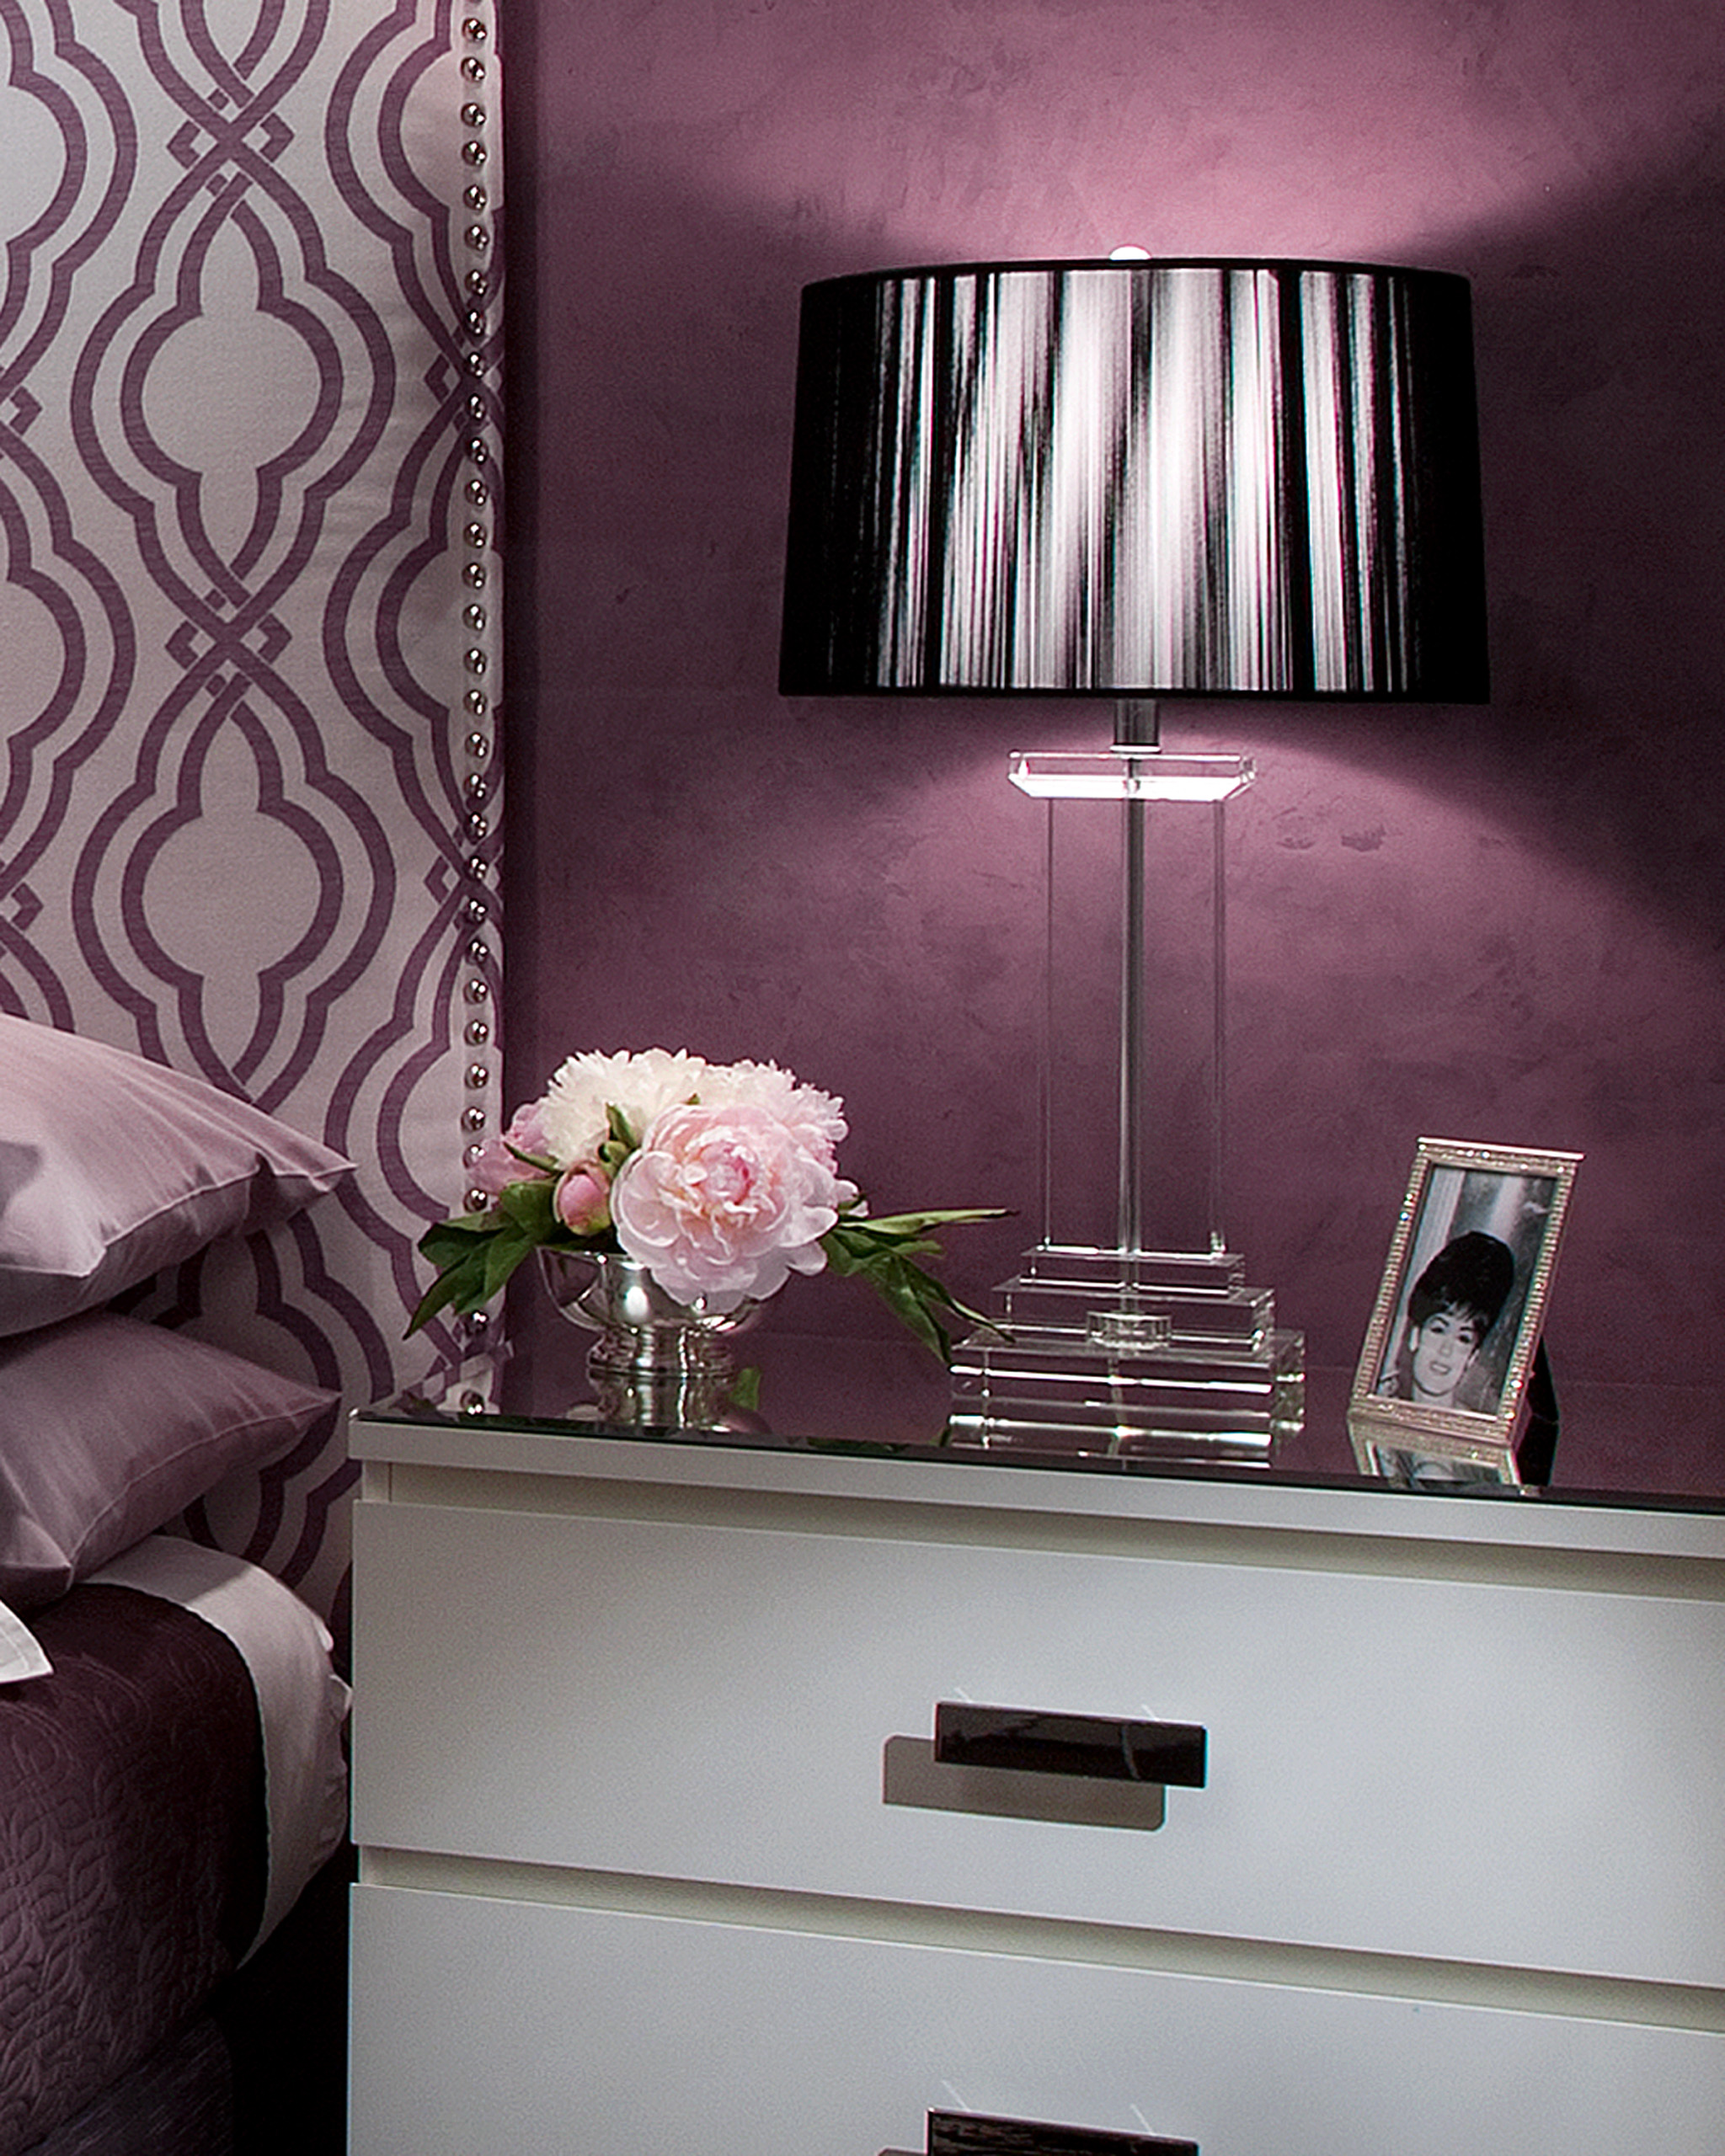 75 Beautiful Purple Master Bedroom Pictures Ideas March 2021 Houzz